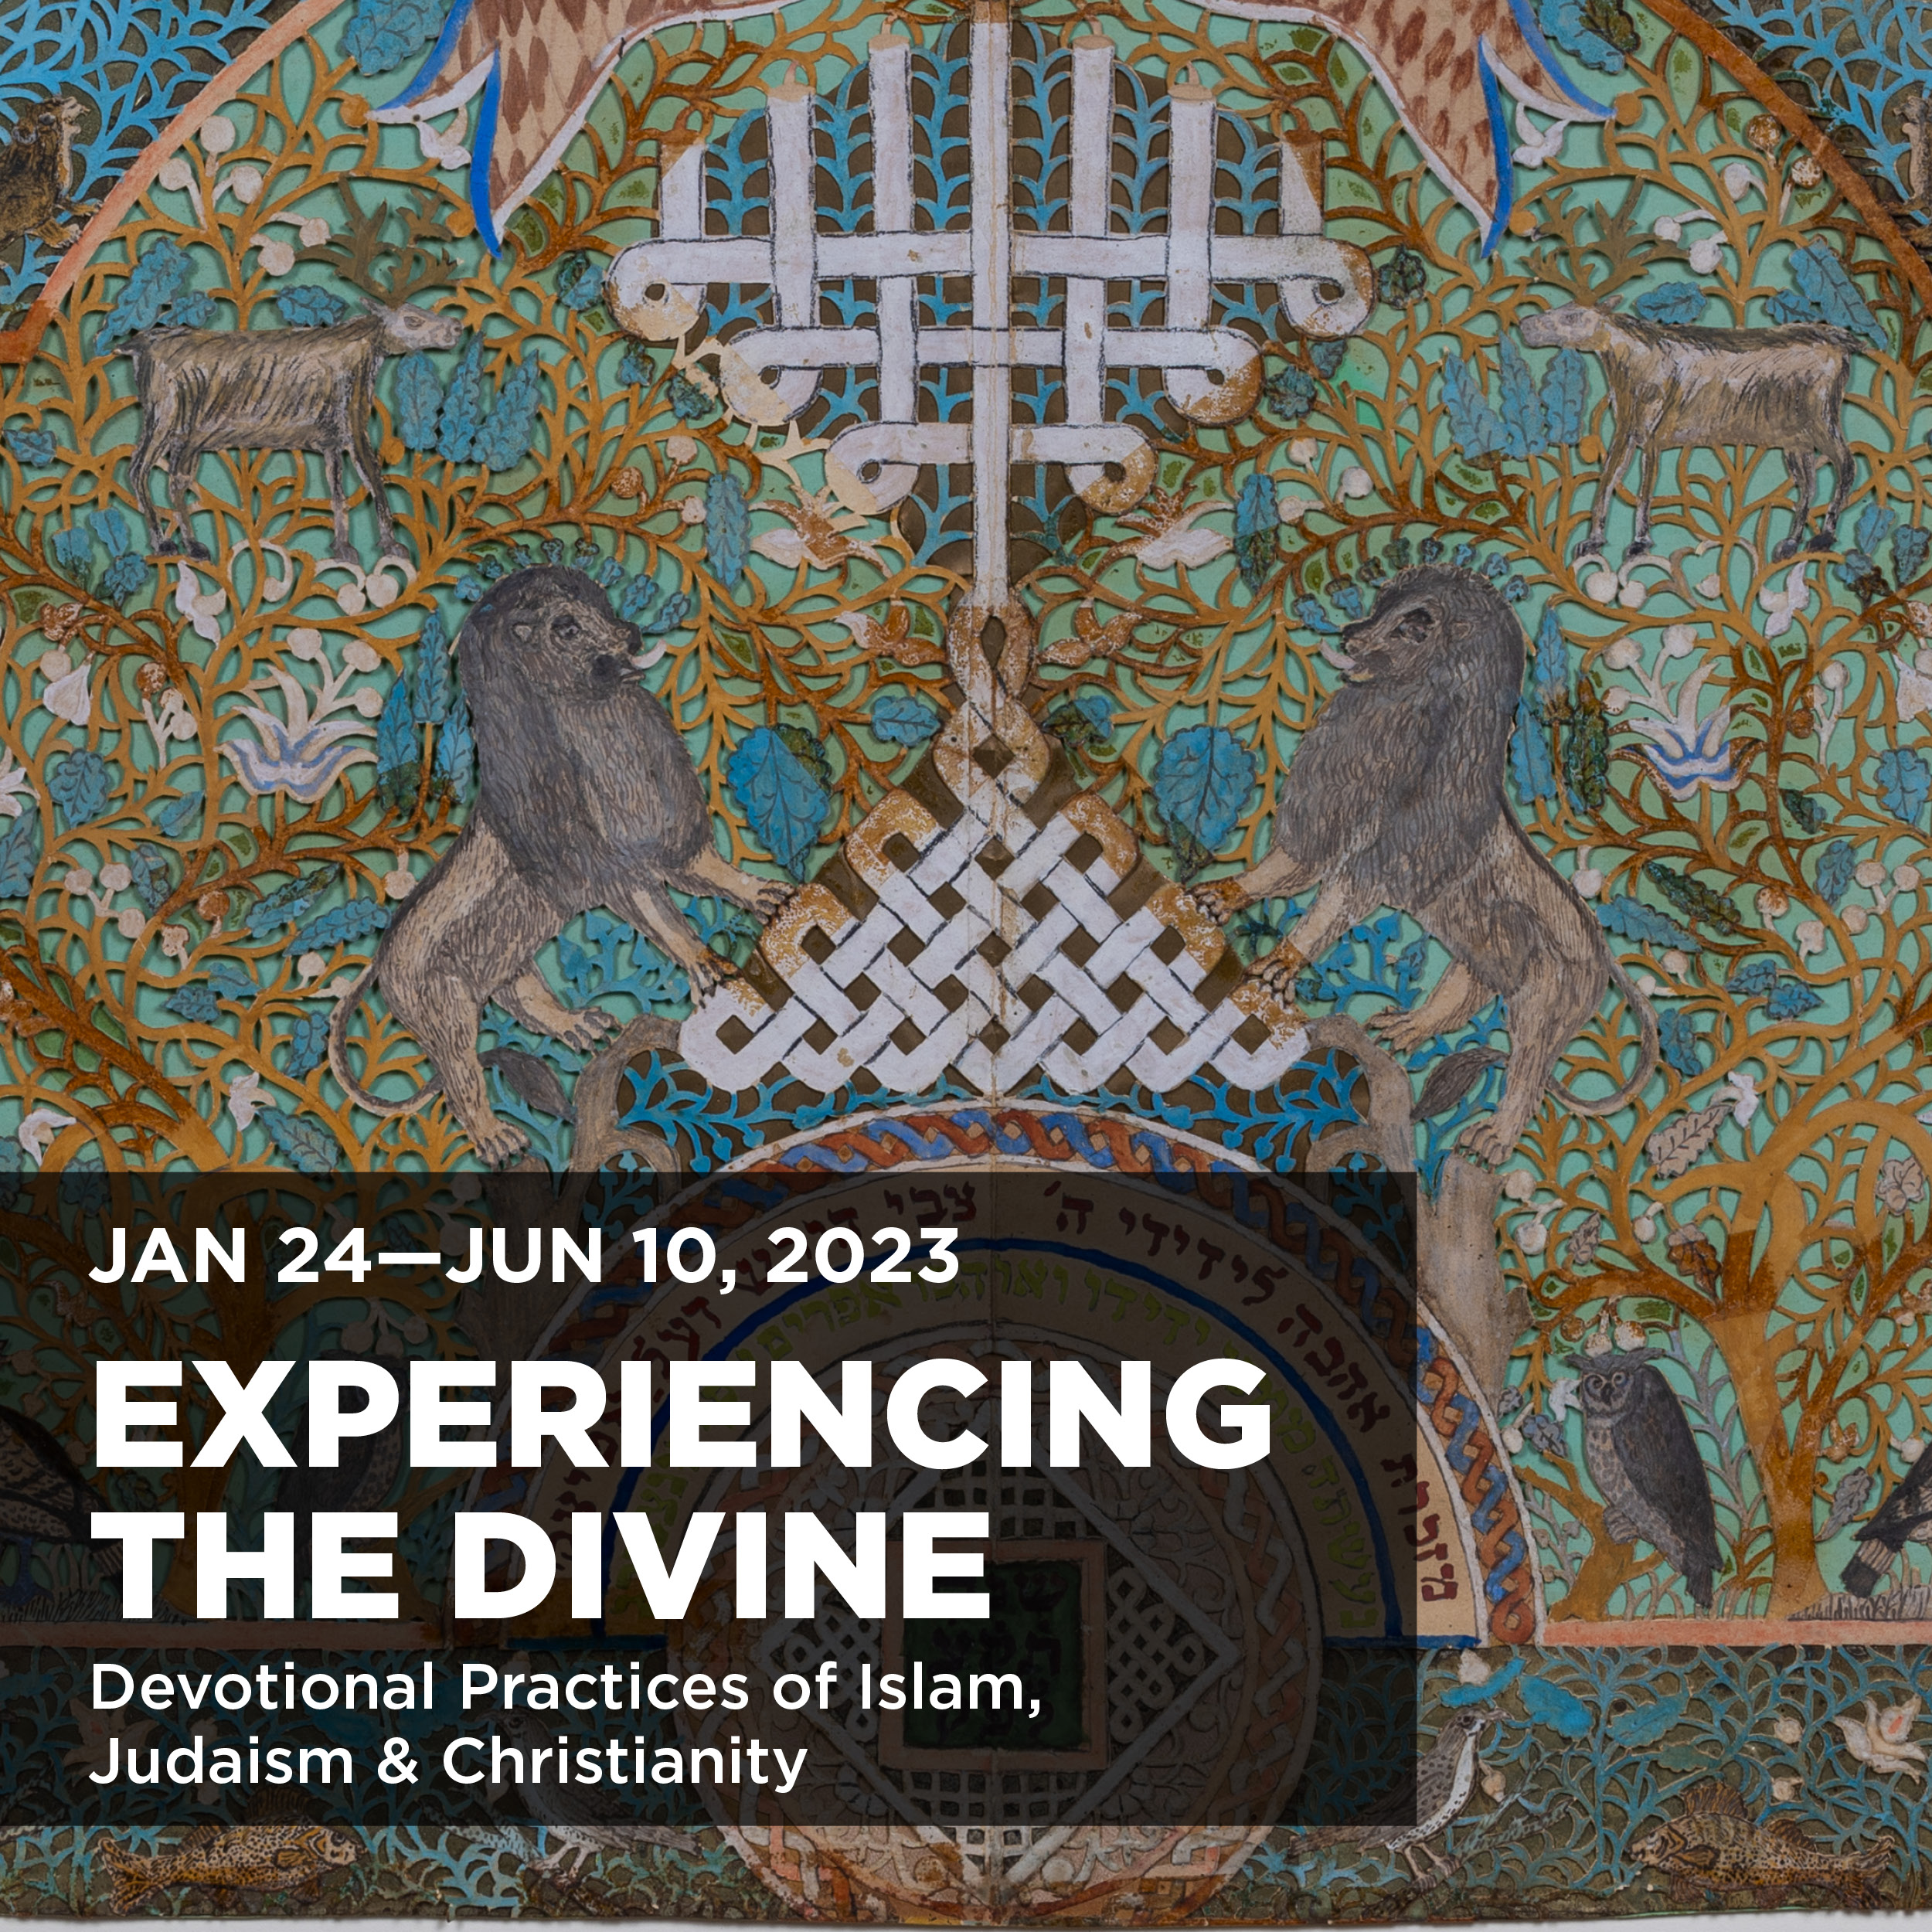 Poster image for the exhibition Experiencing the Divine: Devotional Practices of Islam, Judaism, and Christianity 